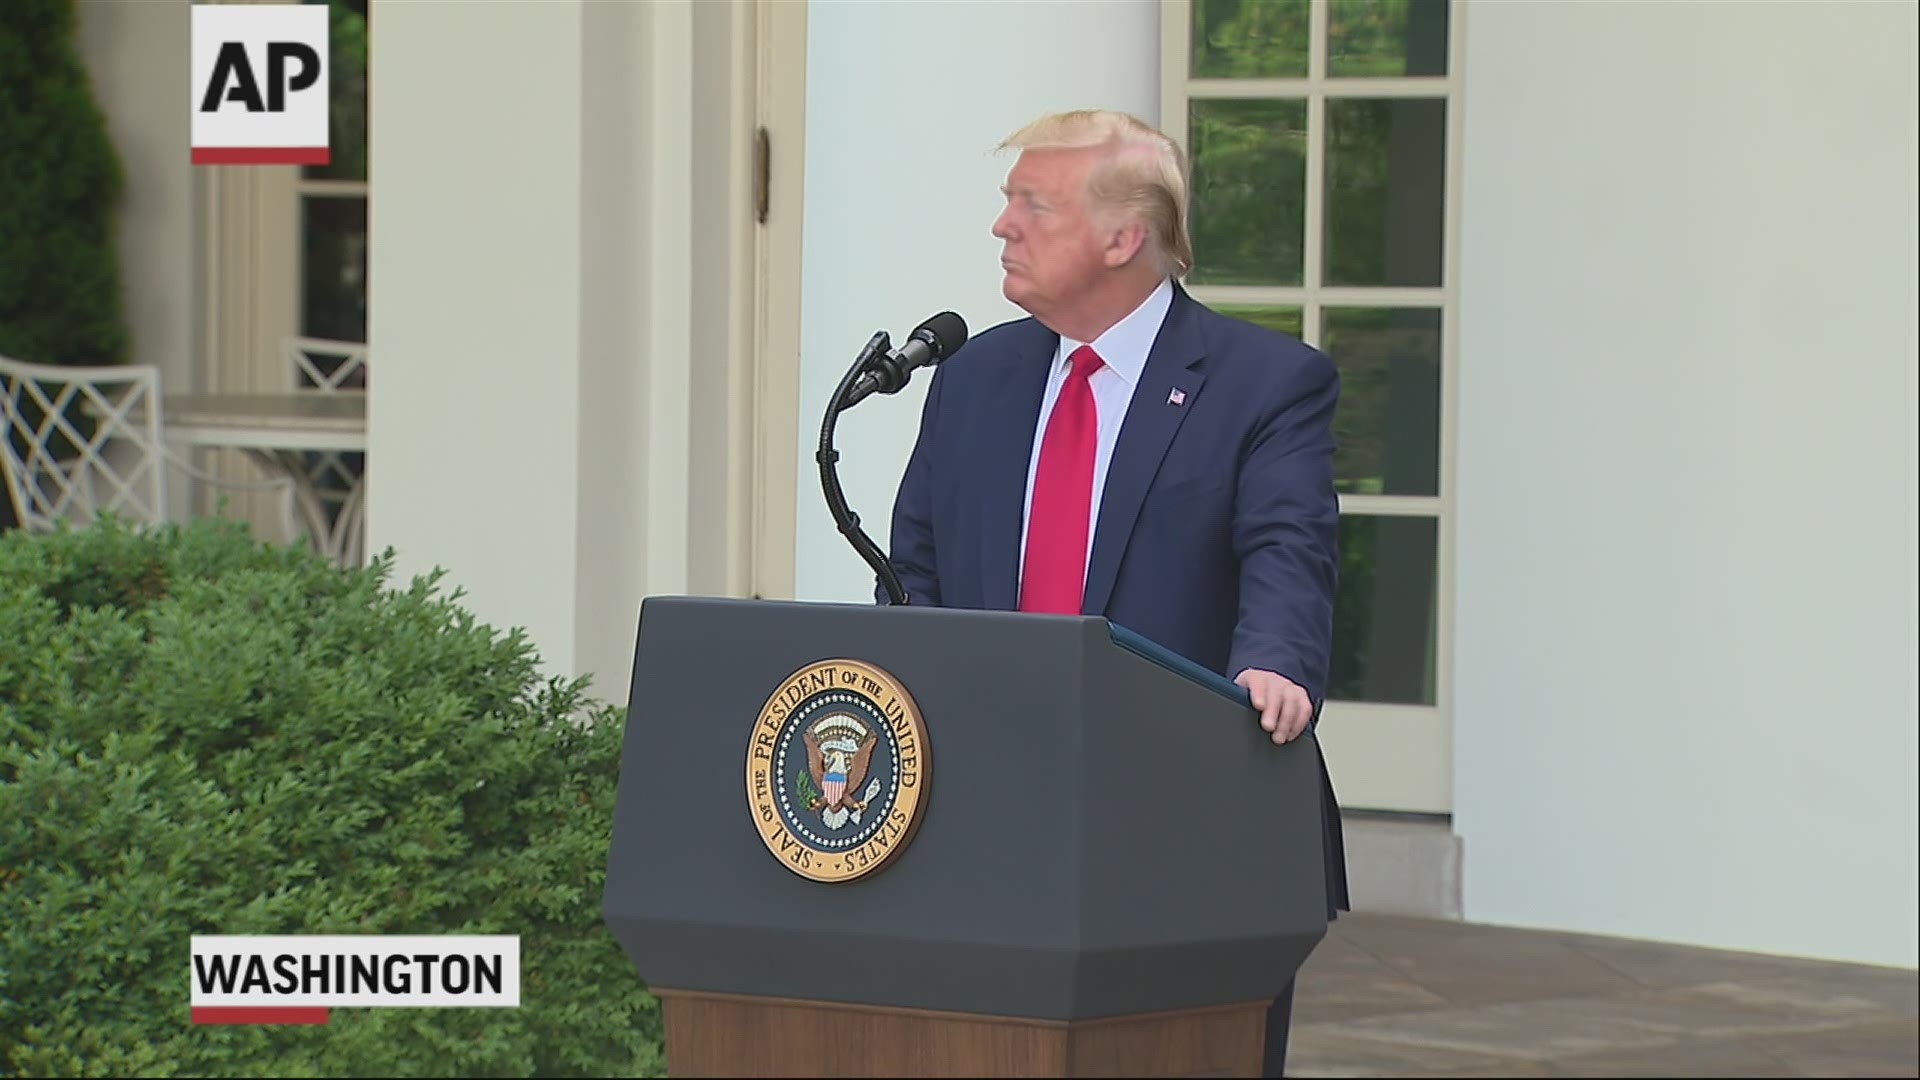 President Trump was asked about Joe Biden wearing a mask and about his comments about Joe Scarborough and the death of a congressional staffer.